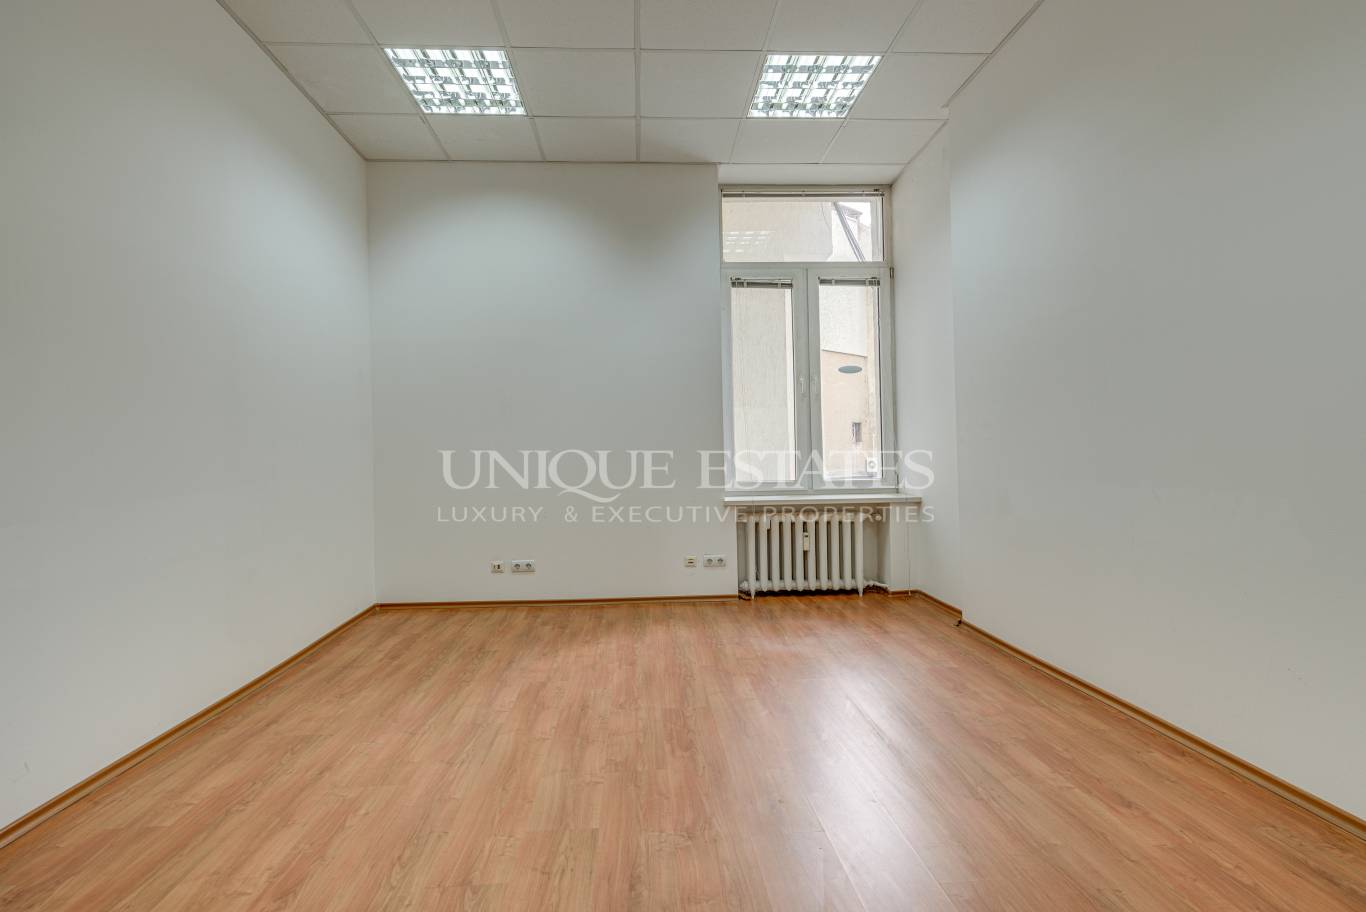 Office for rent in Sofia, Downtown with listing ID: K4831 - image 5